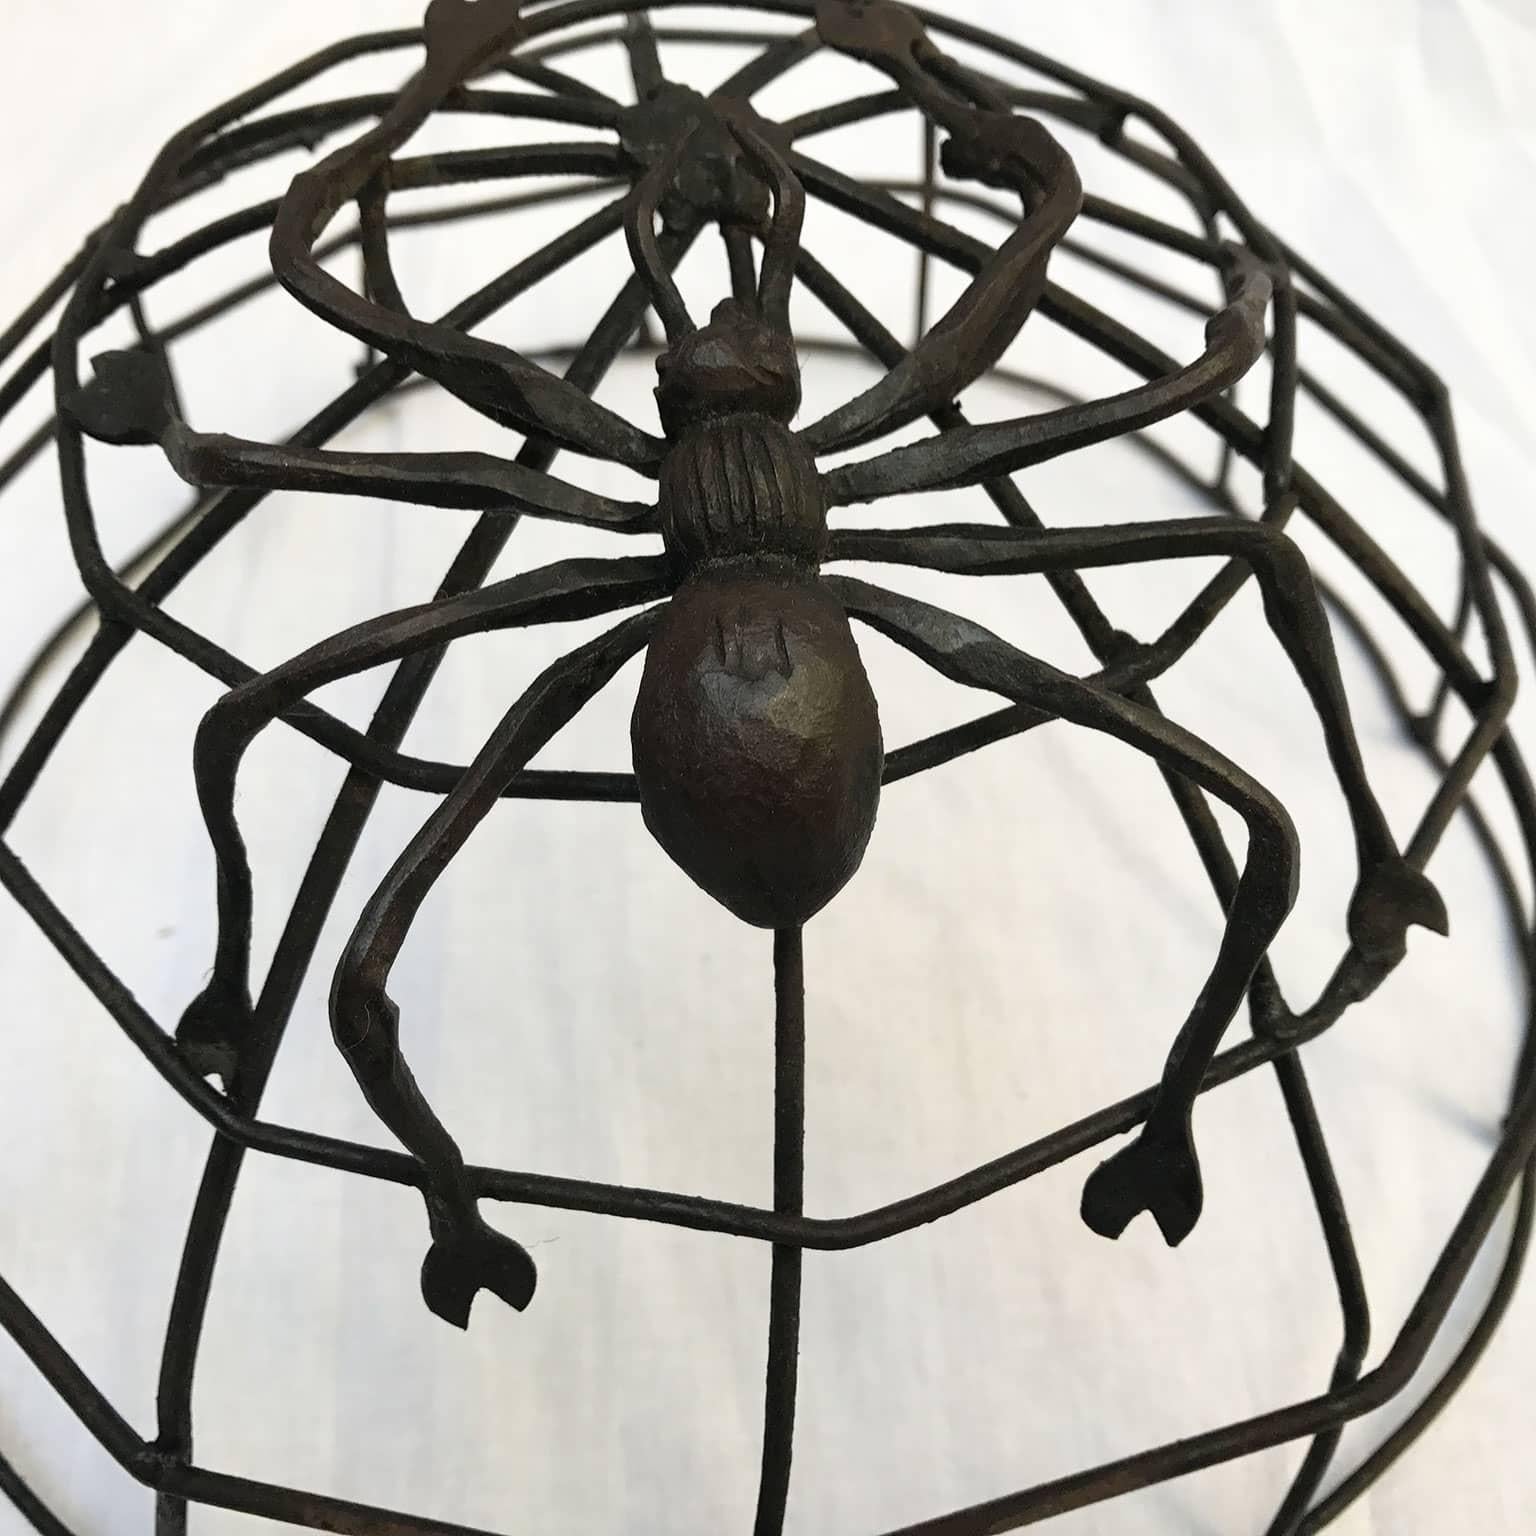 Italian one-light wrought iron cobweb and spider ceiling lamp with a single Edison 27 bulb light; a very unusual handmade light, a circular leafy garland with a spider web shaped ceiling fixture. It may be hanged to the ceiling or fixed to the wall